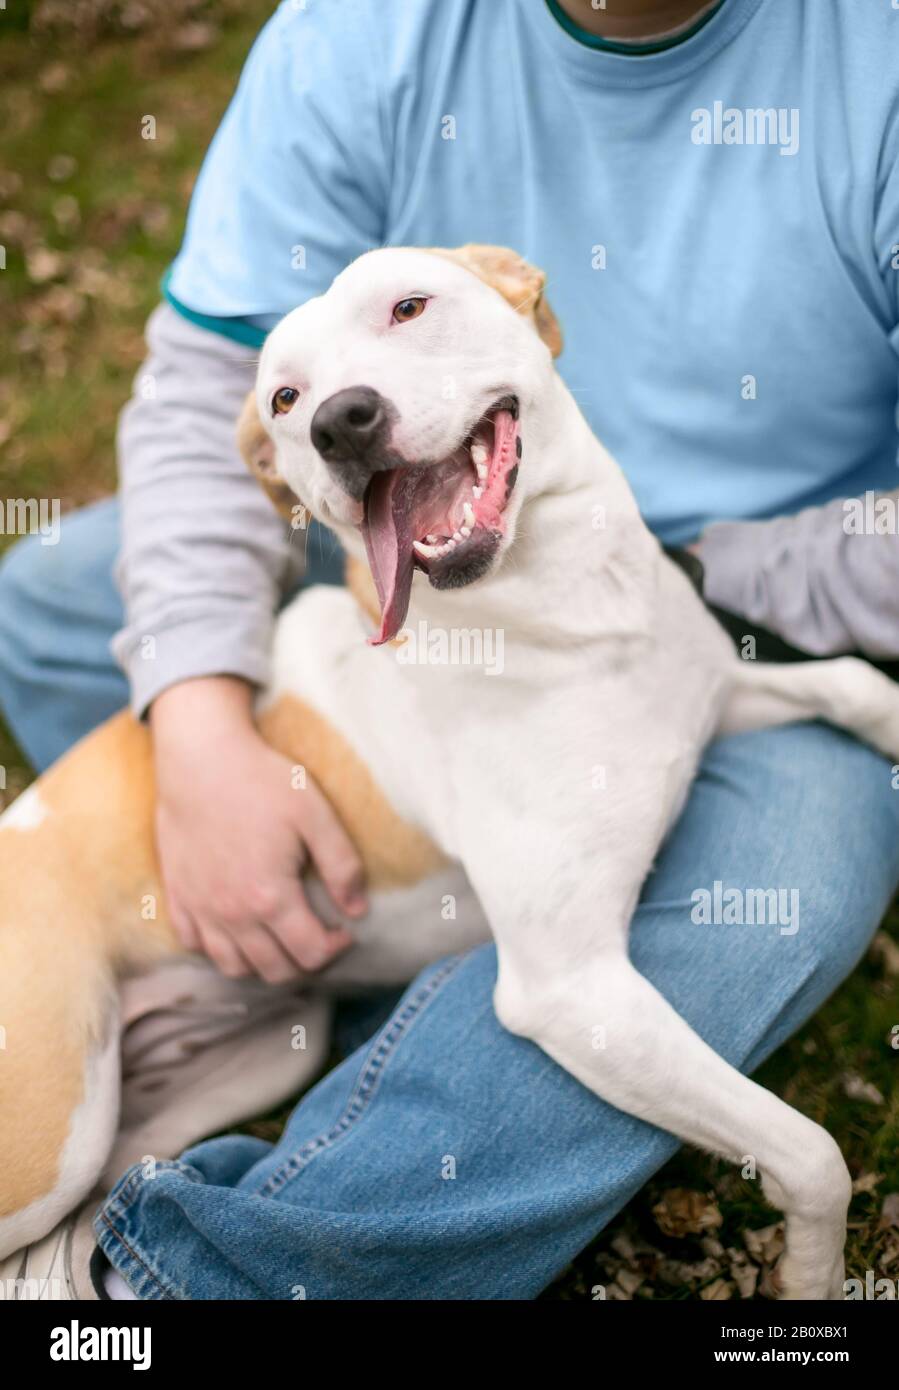 A happy Pit Bull Terrier mixed breed dog sitting in a person's lap Stock Photo